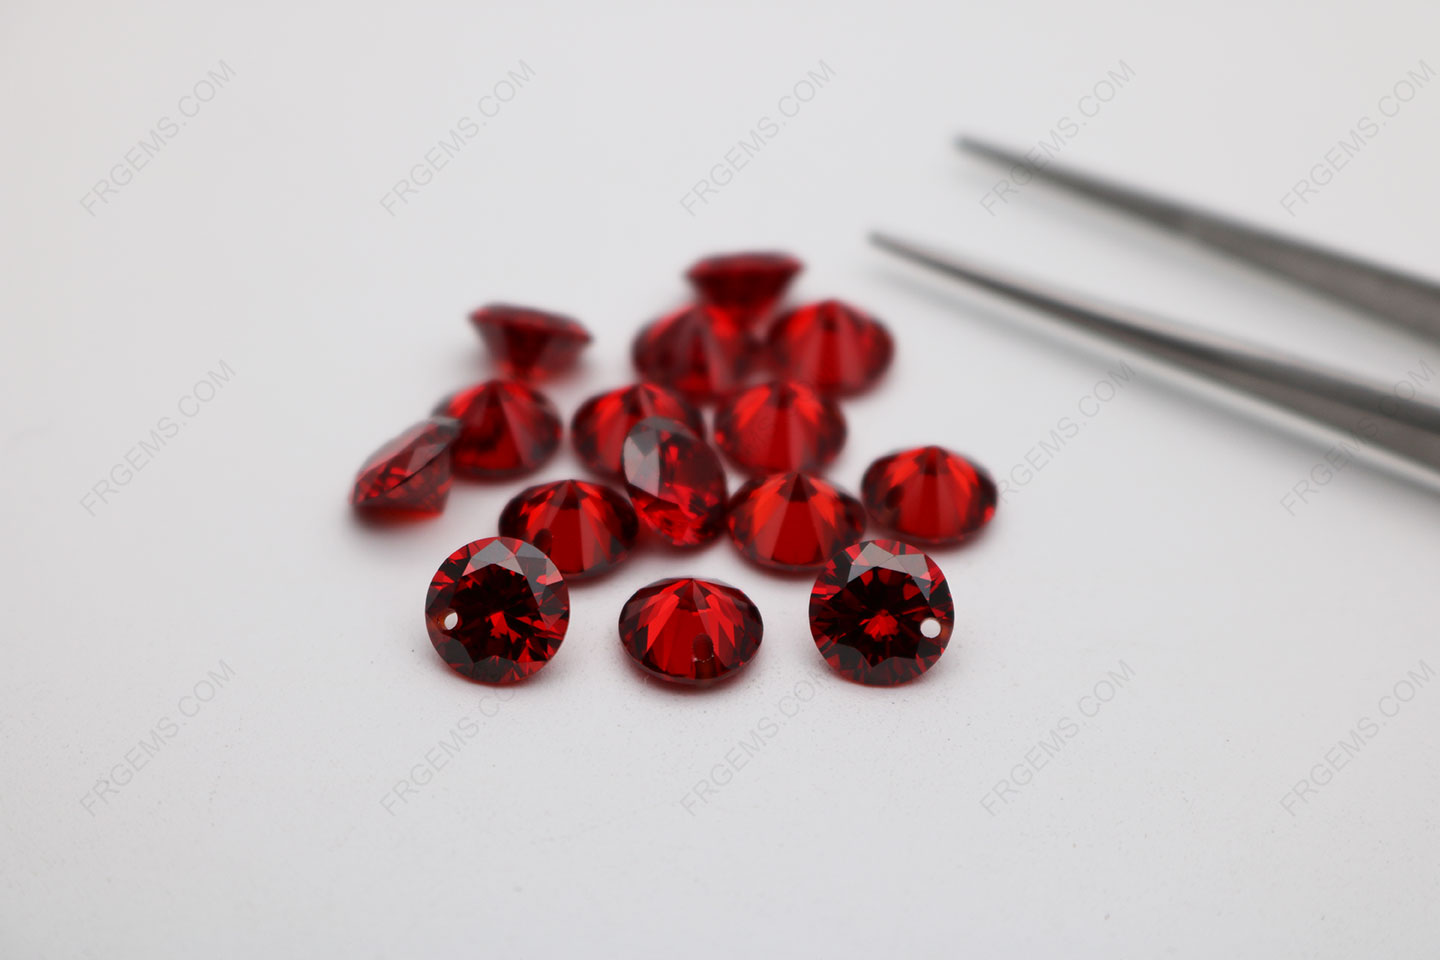 Cubic Zirconia Garnet Red Round Faceted Cut with drilled hole 8mm stones CZ22 IMG_1345